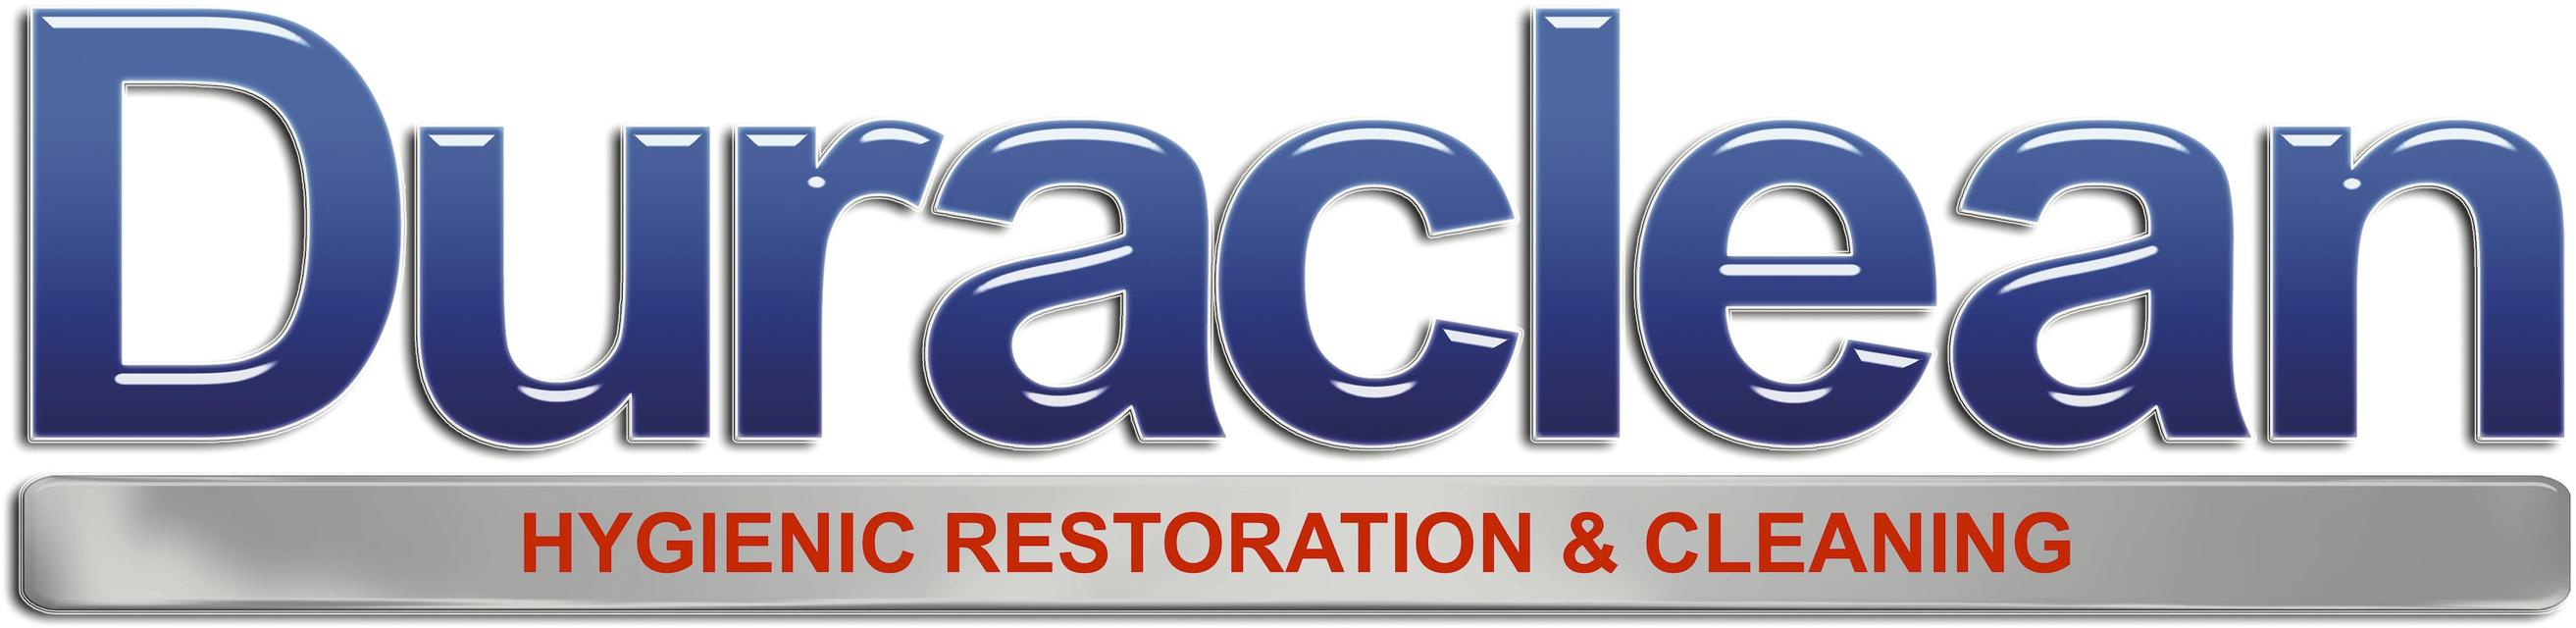 Duraclean Hygienic Restoration & Cleaning